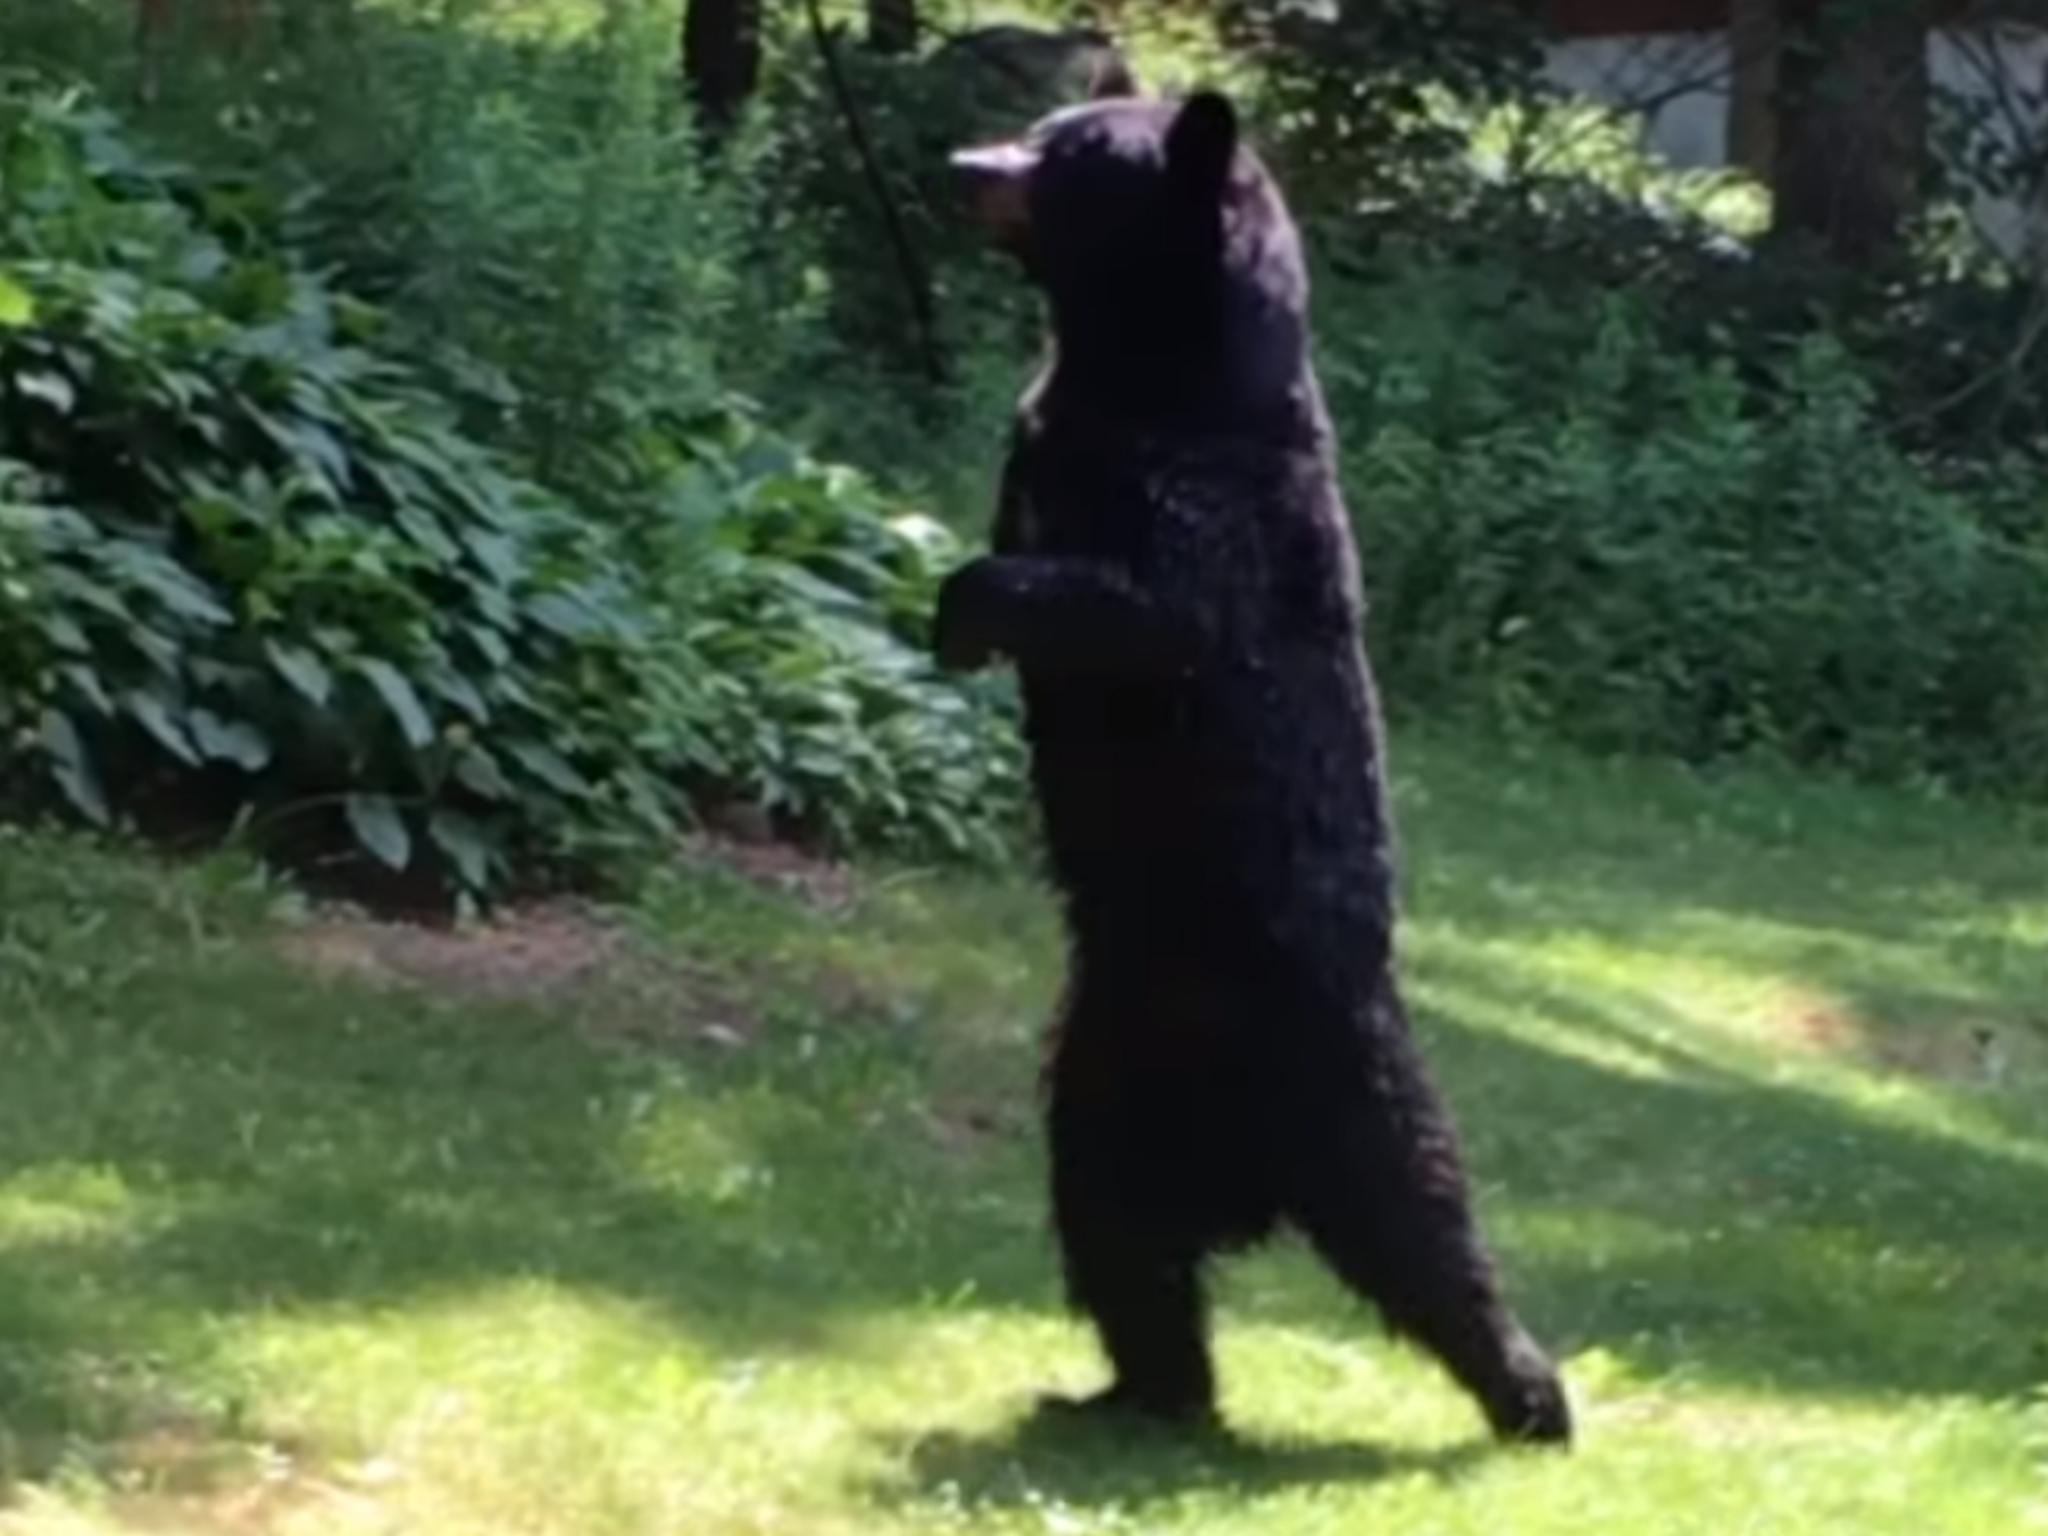 Pedals the bear, who walked upright due to his front paws being injured